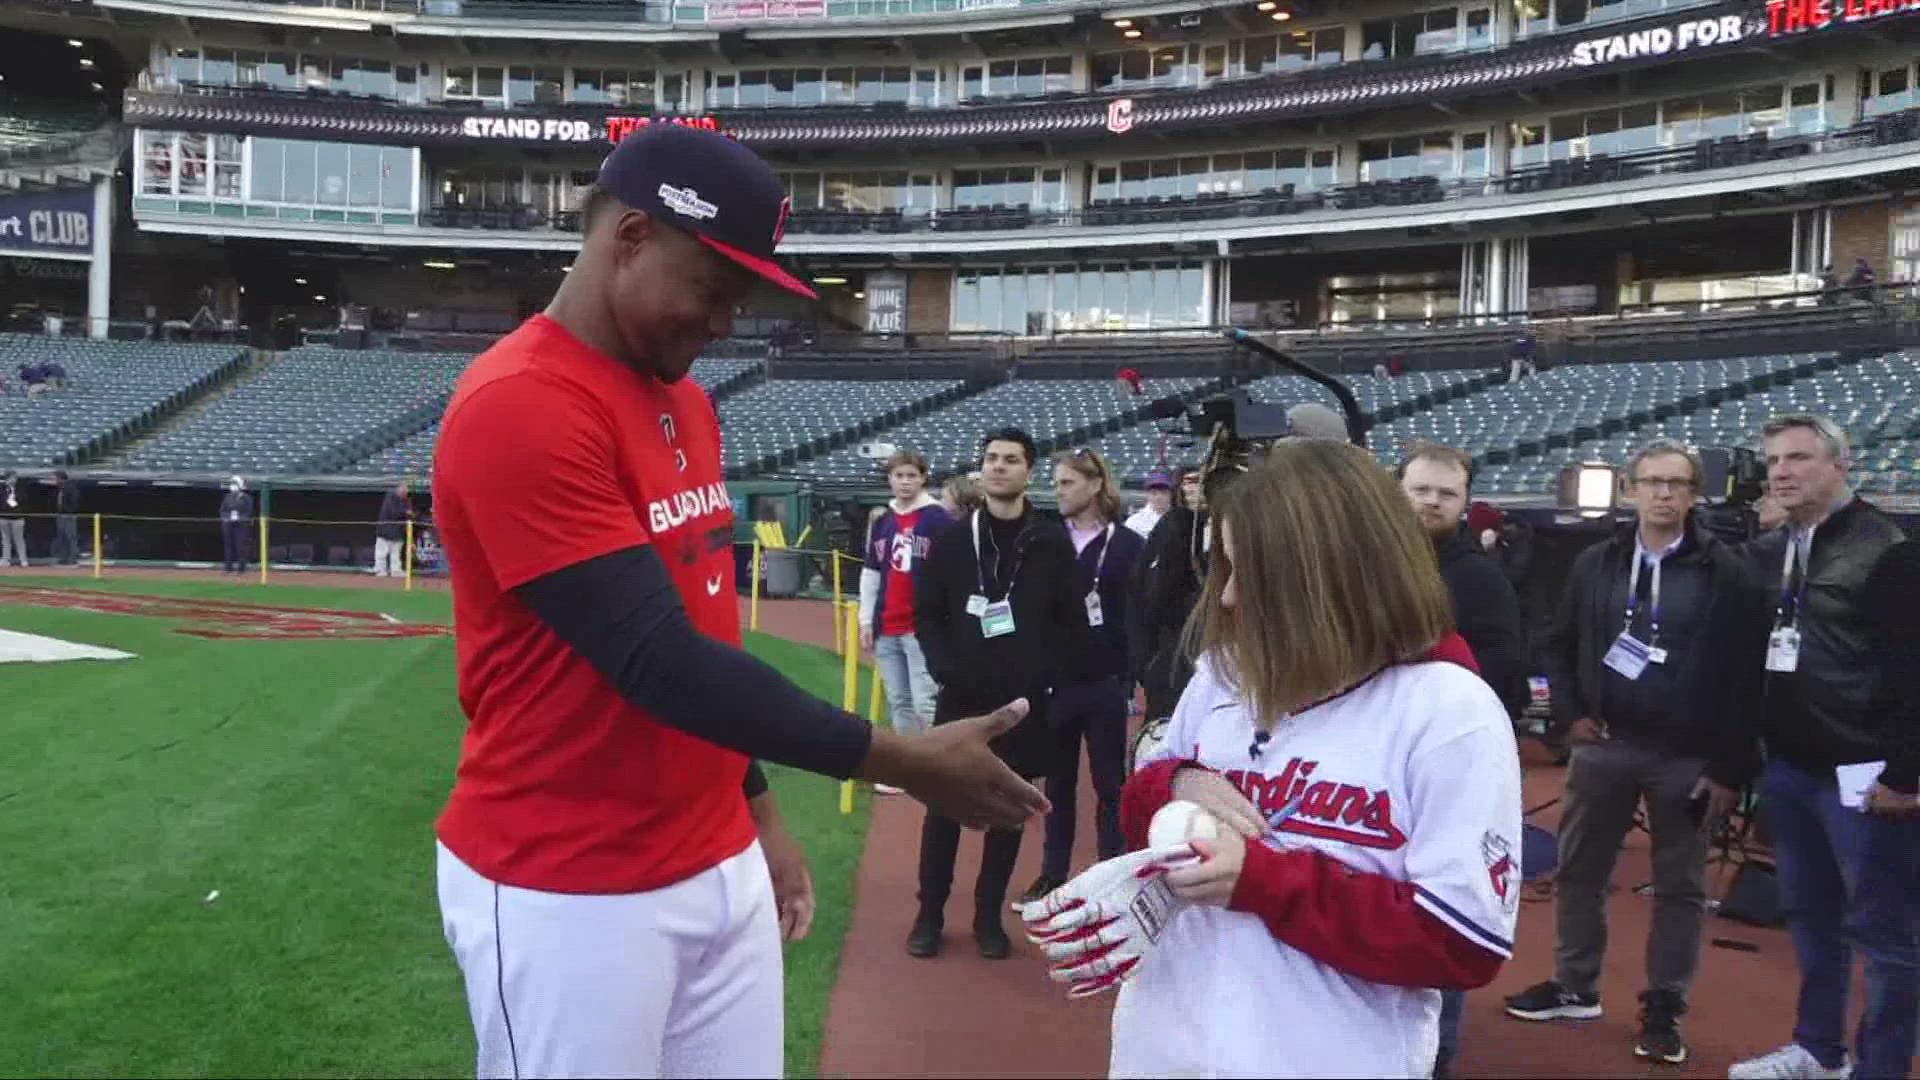 Megan Forshey graciously returned the special baseball to Oscar Gonzalez, but the Gonzalez and the Guardians weren't going to let her walk away empty handed.